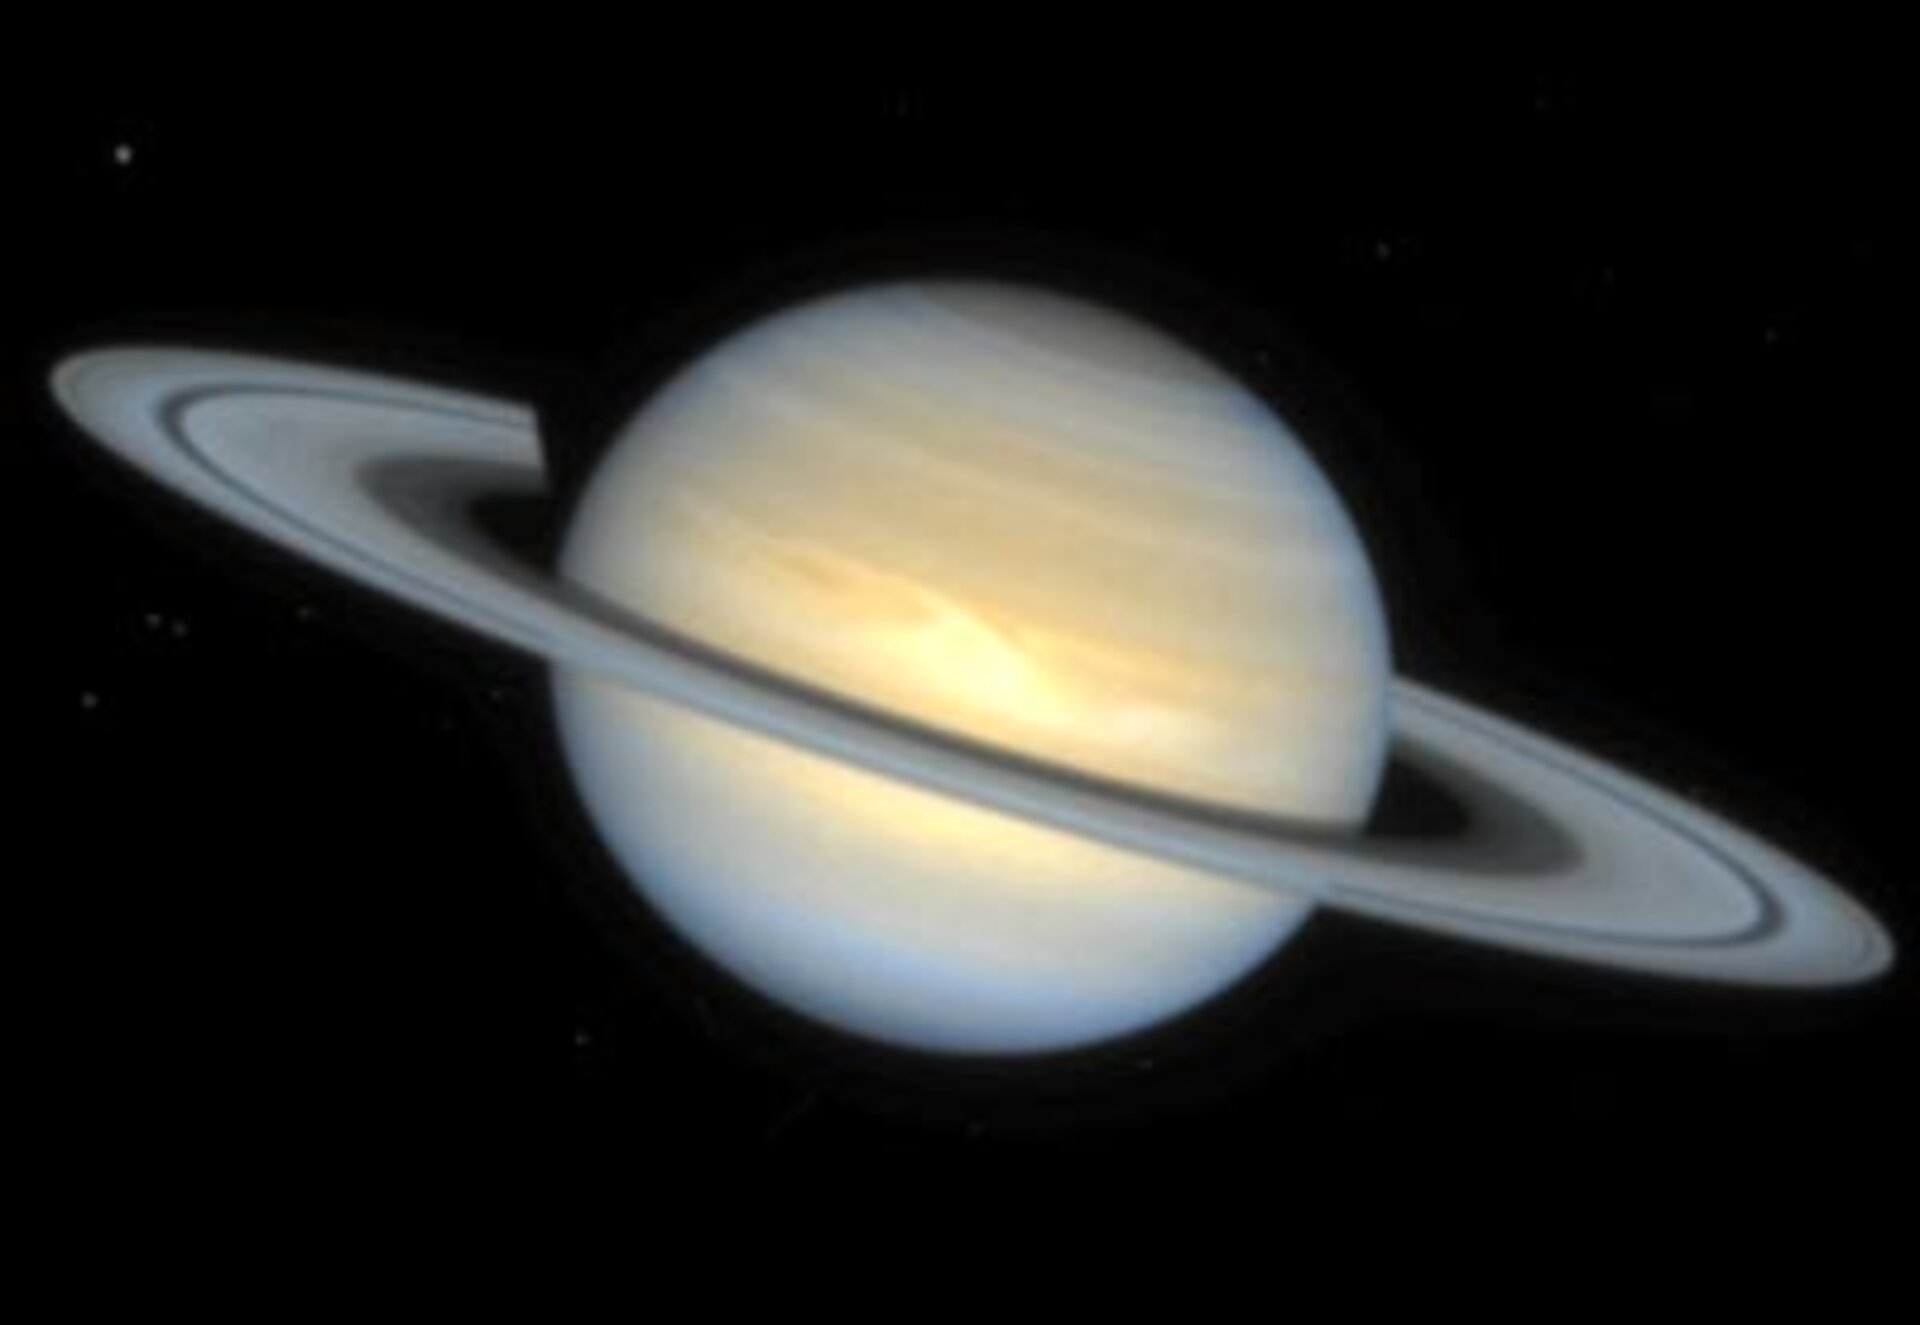 esa-nasa-hubble-space-telescope-image-of-the-ringed-planet-saturn